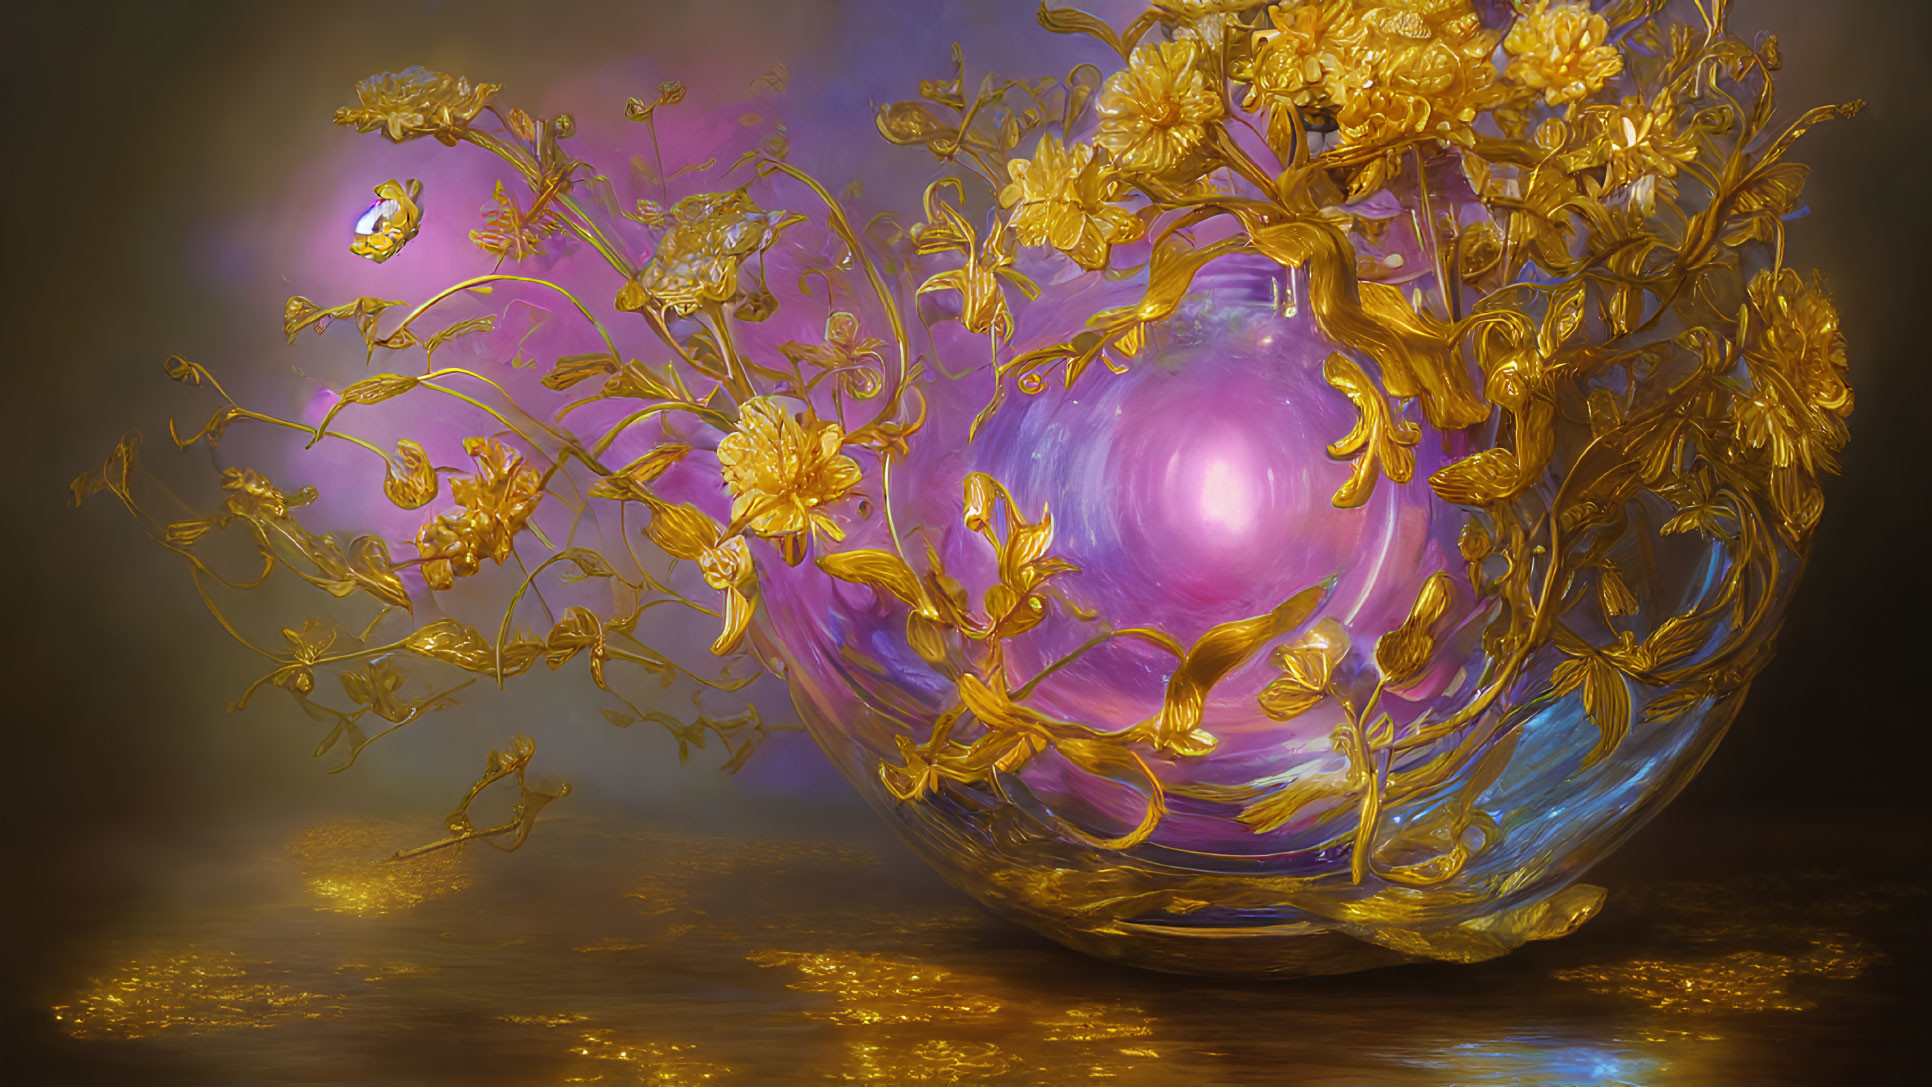 Colorful Digital Art: Glass Orb with Golden Florals & Purple Glow